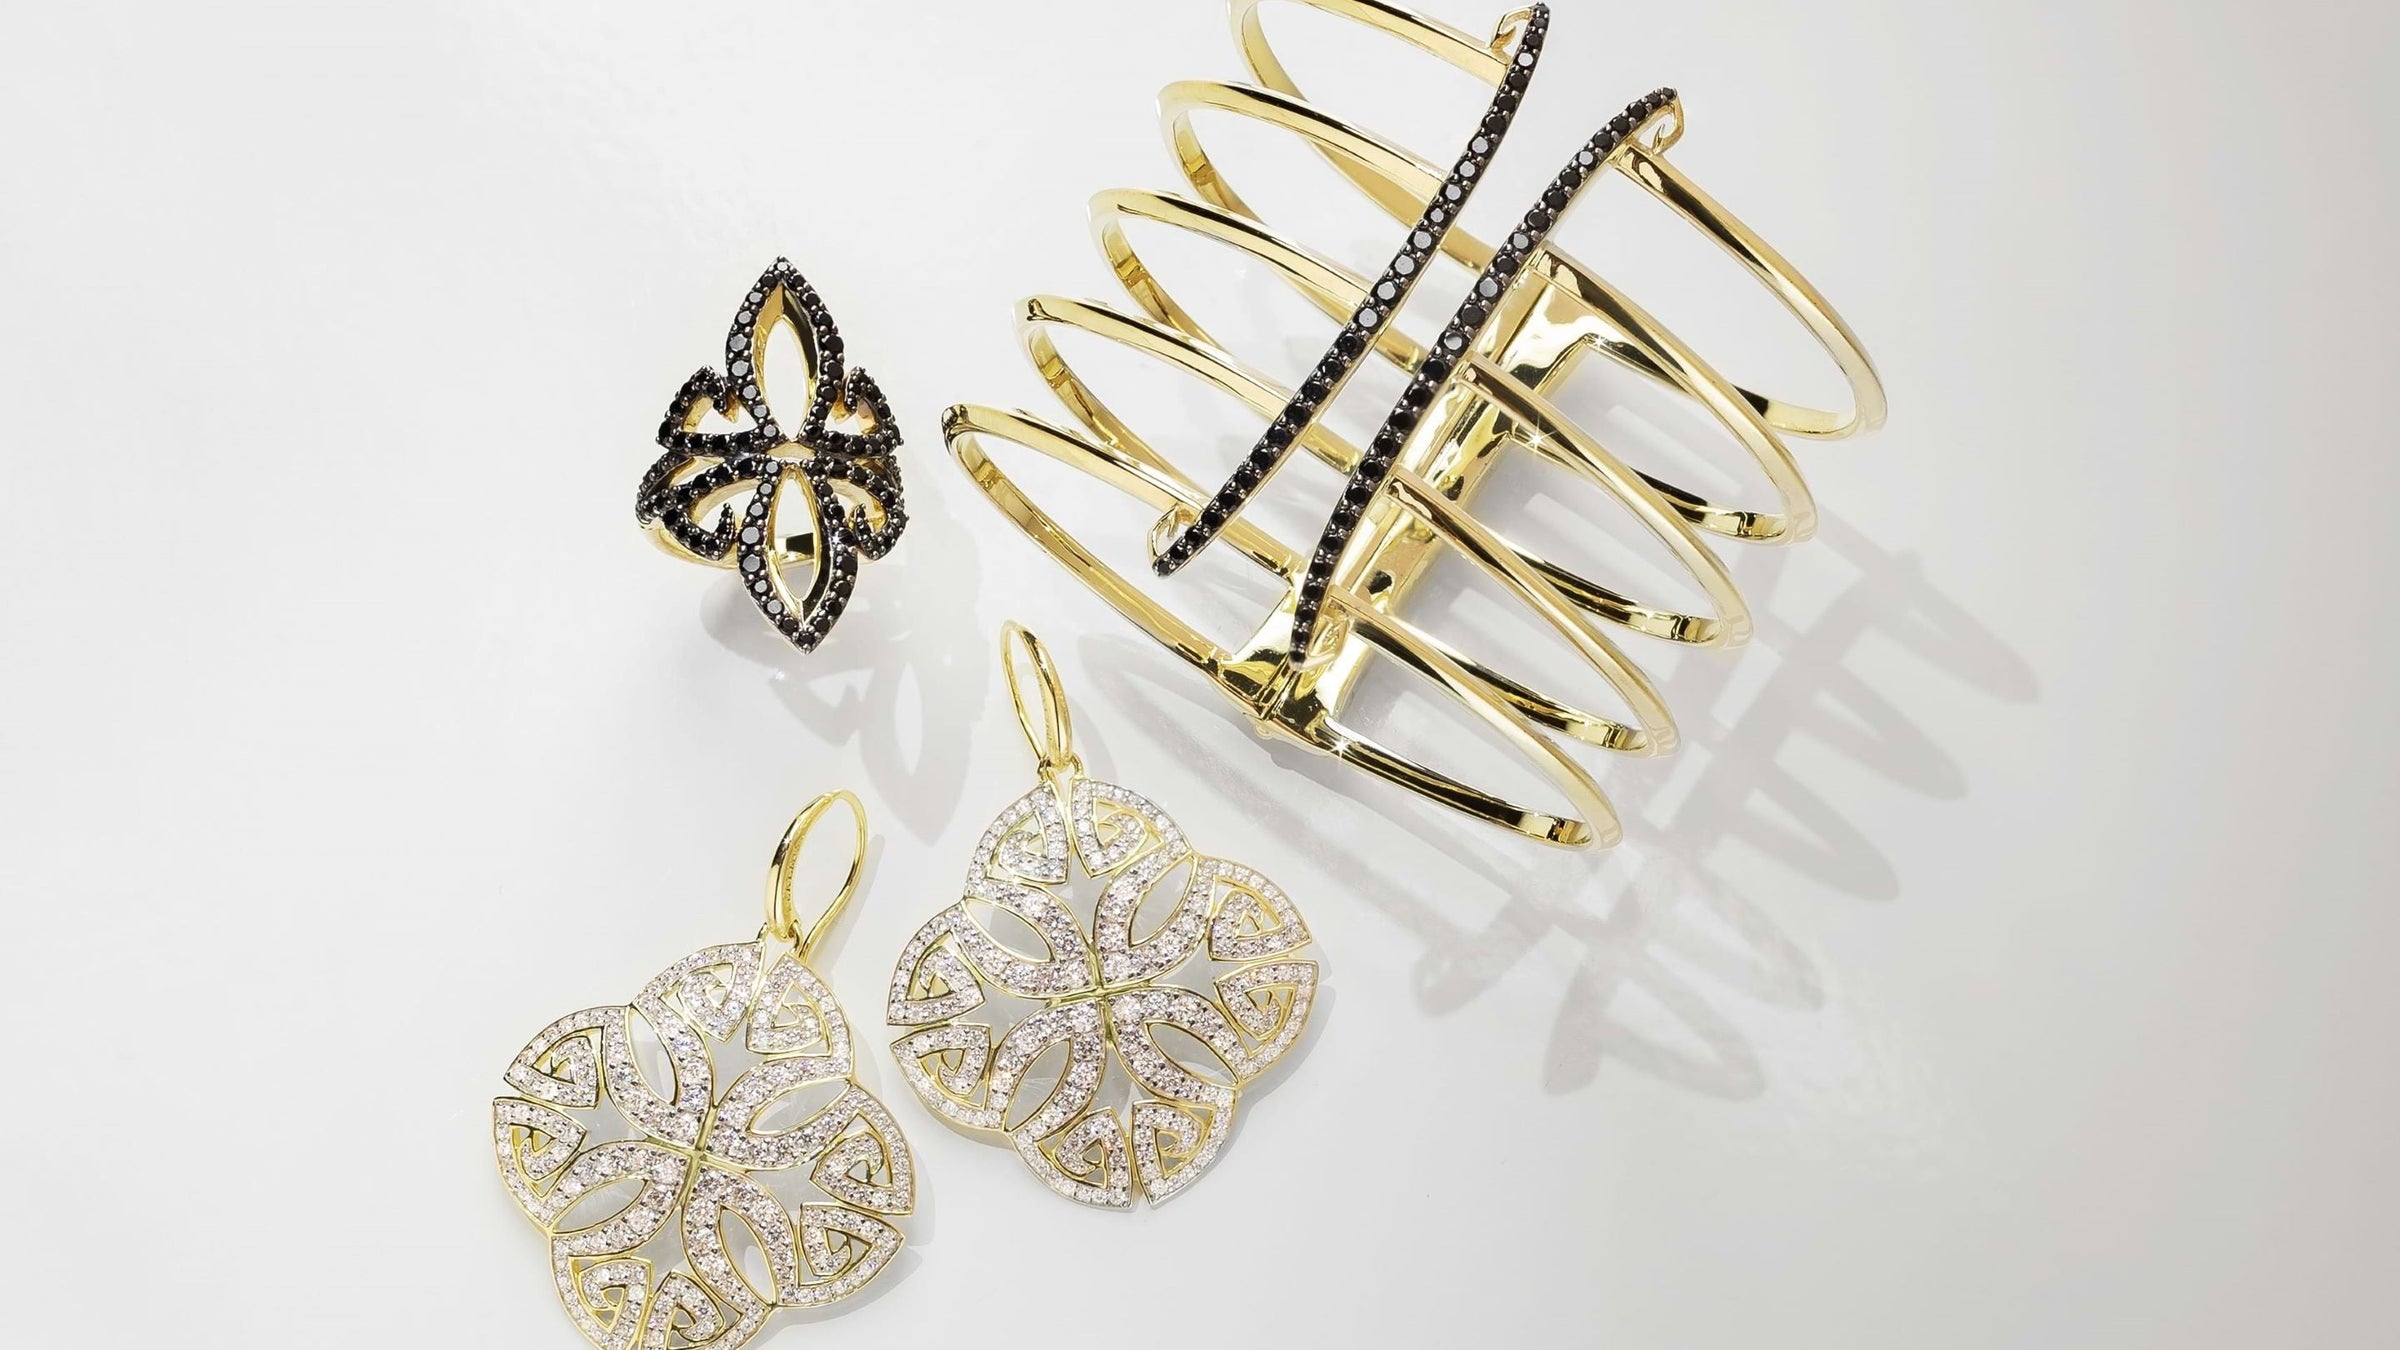 Luxurious trio of ring, earrings and cuff from REALM under $1000